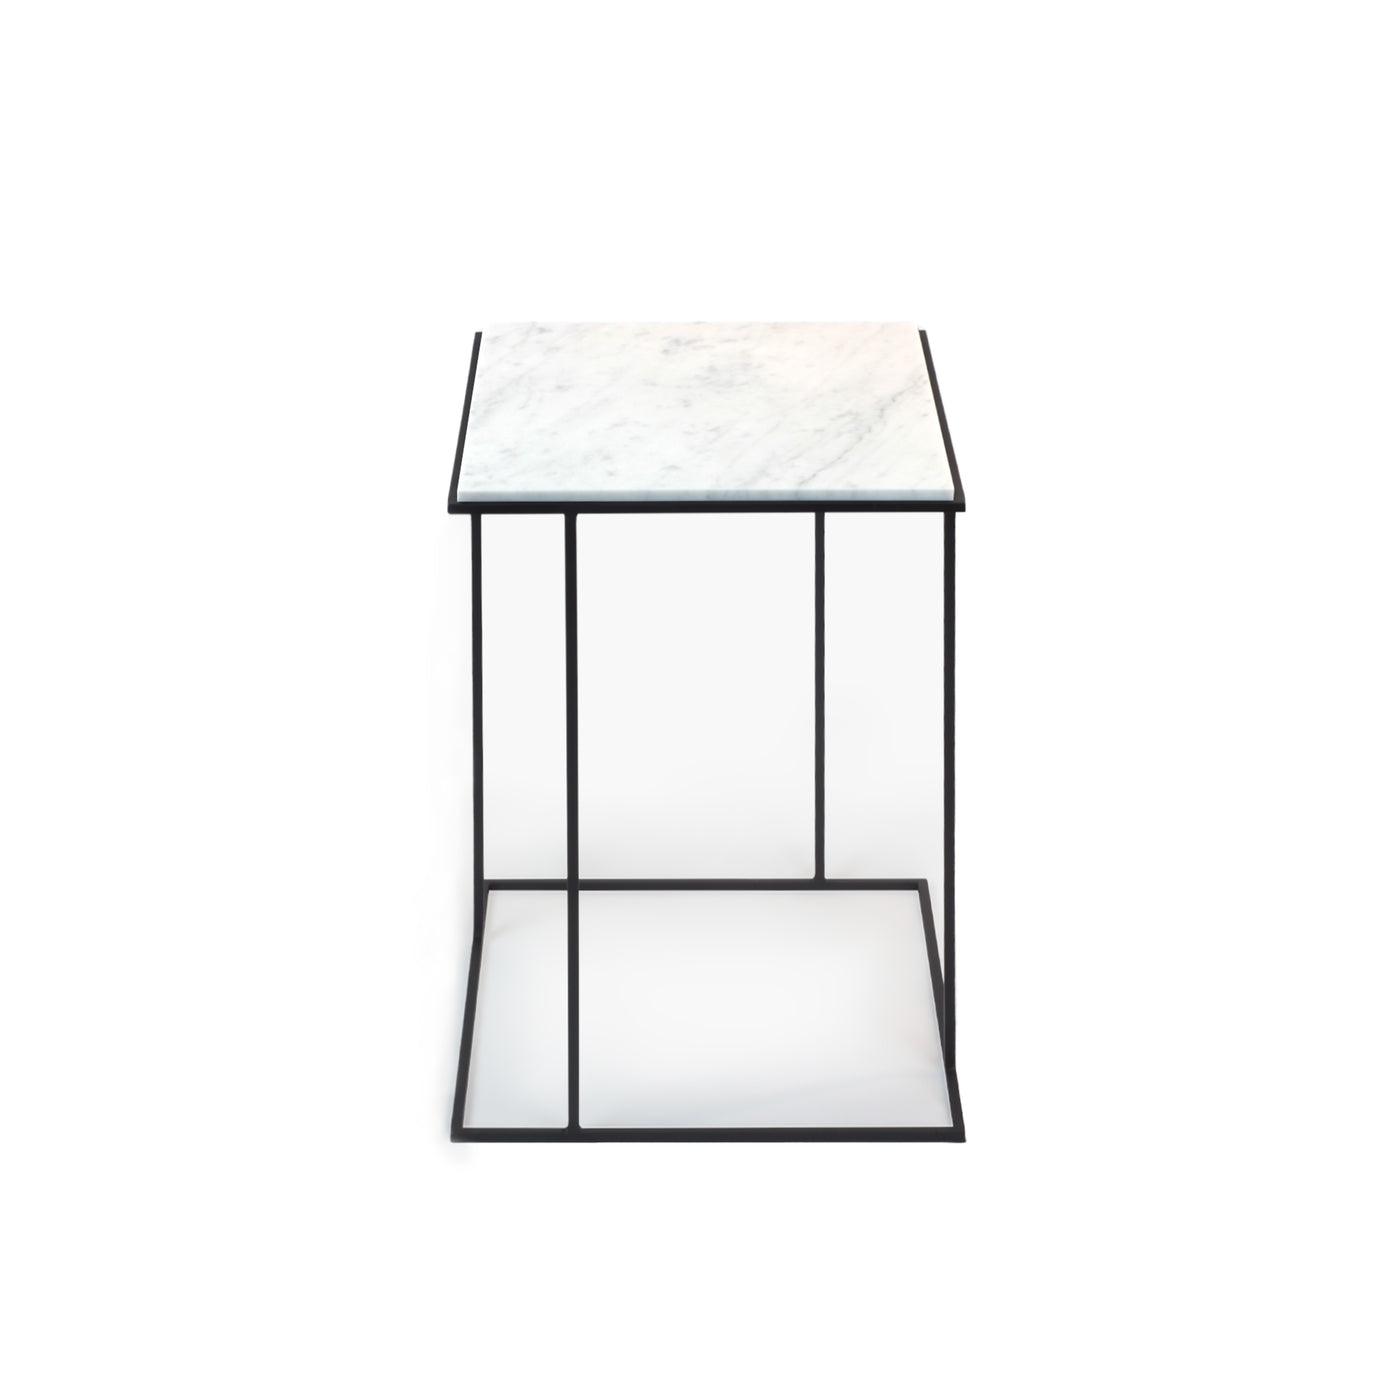 Stone Side Table FRAME by Nicola Di Froscia for DFdesignLab 016